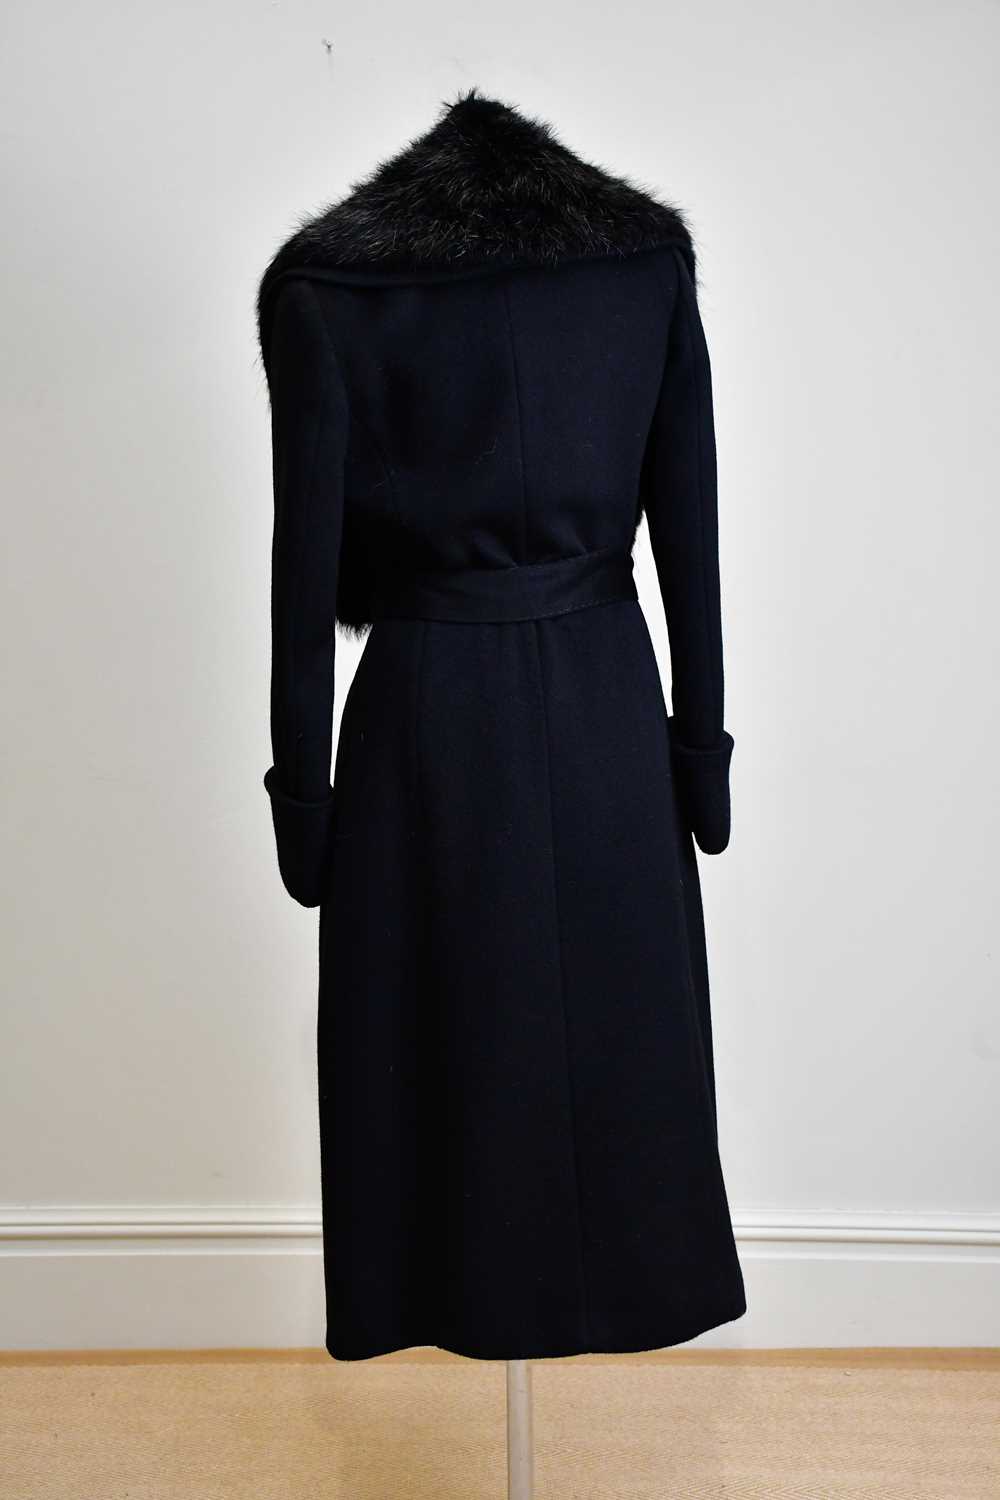 ALEXANDER MCQUEEN; an unworn autumn/winter c2006 100% cashmere black full length lady's coat with - Image 3 of 4